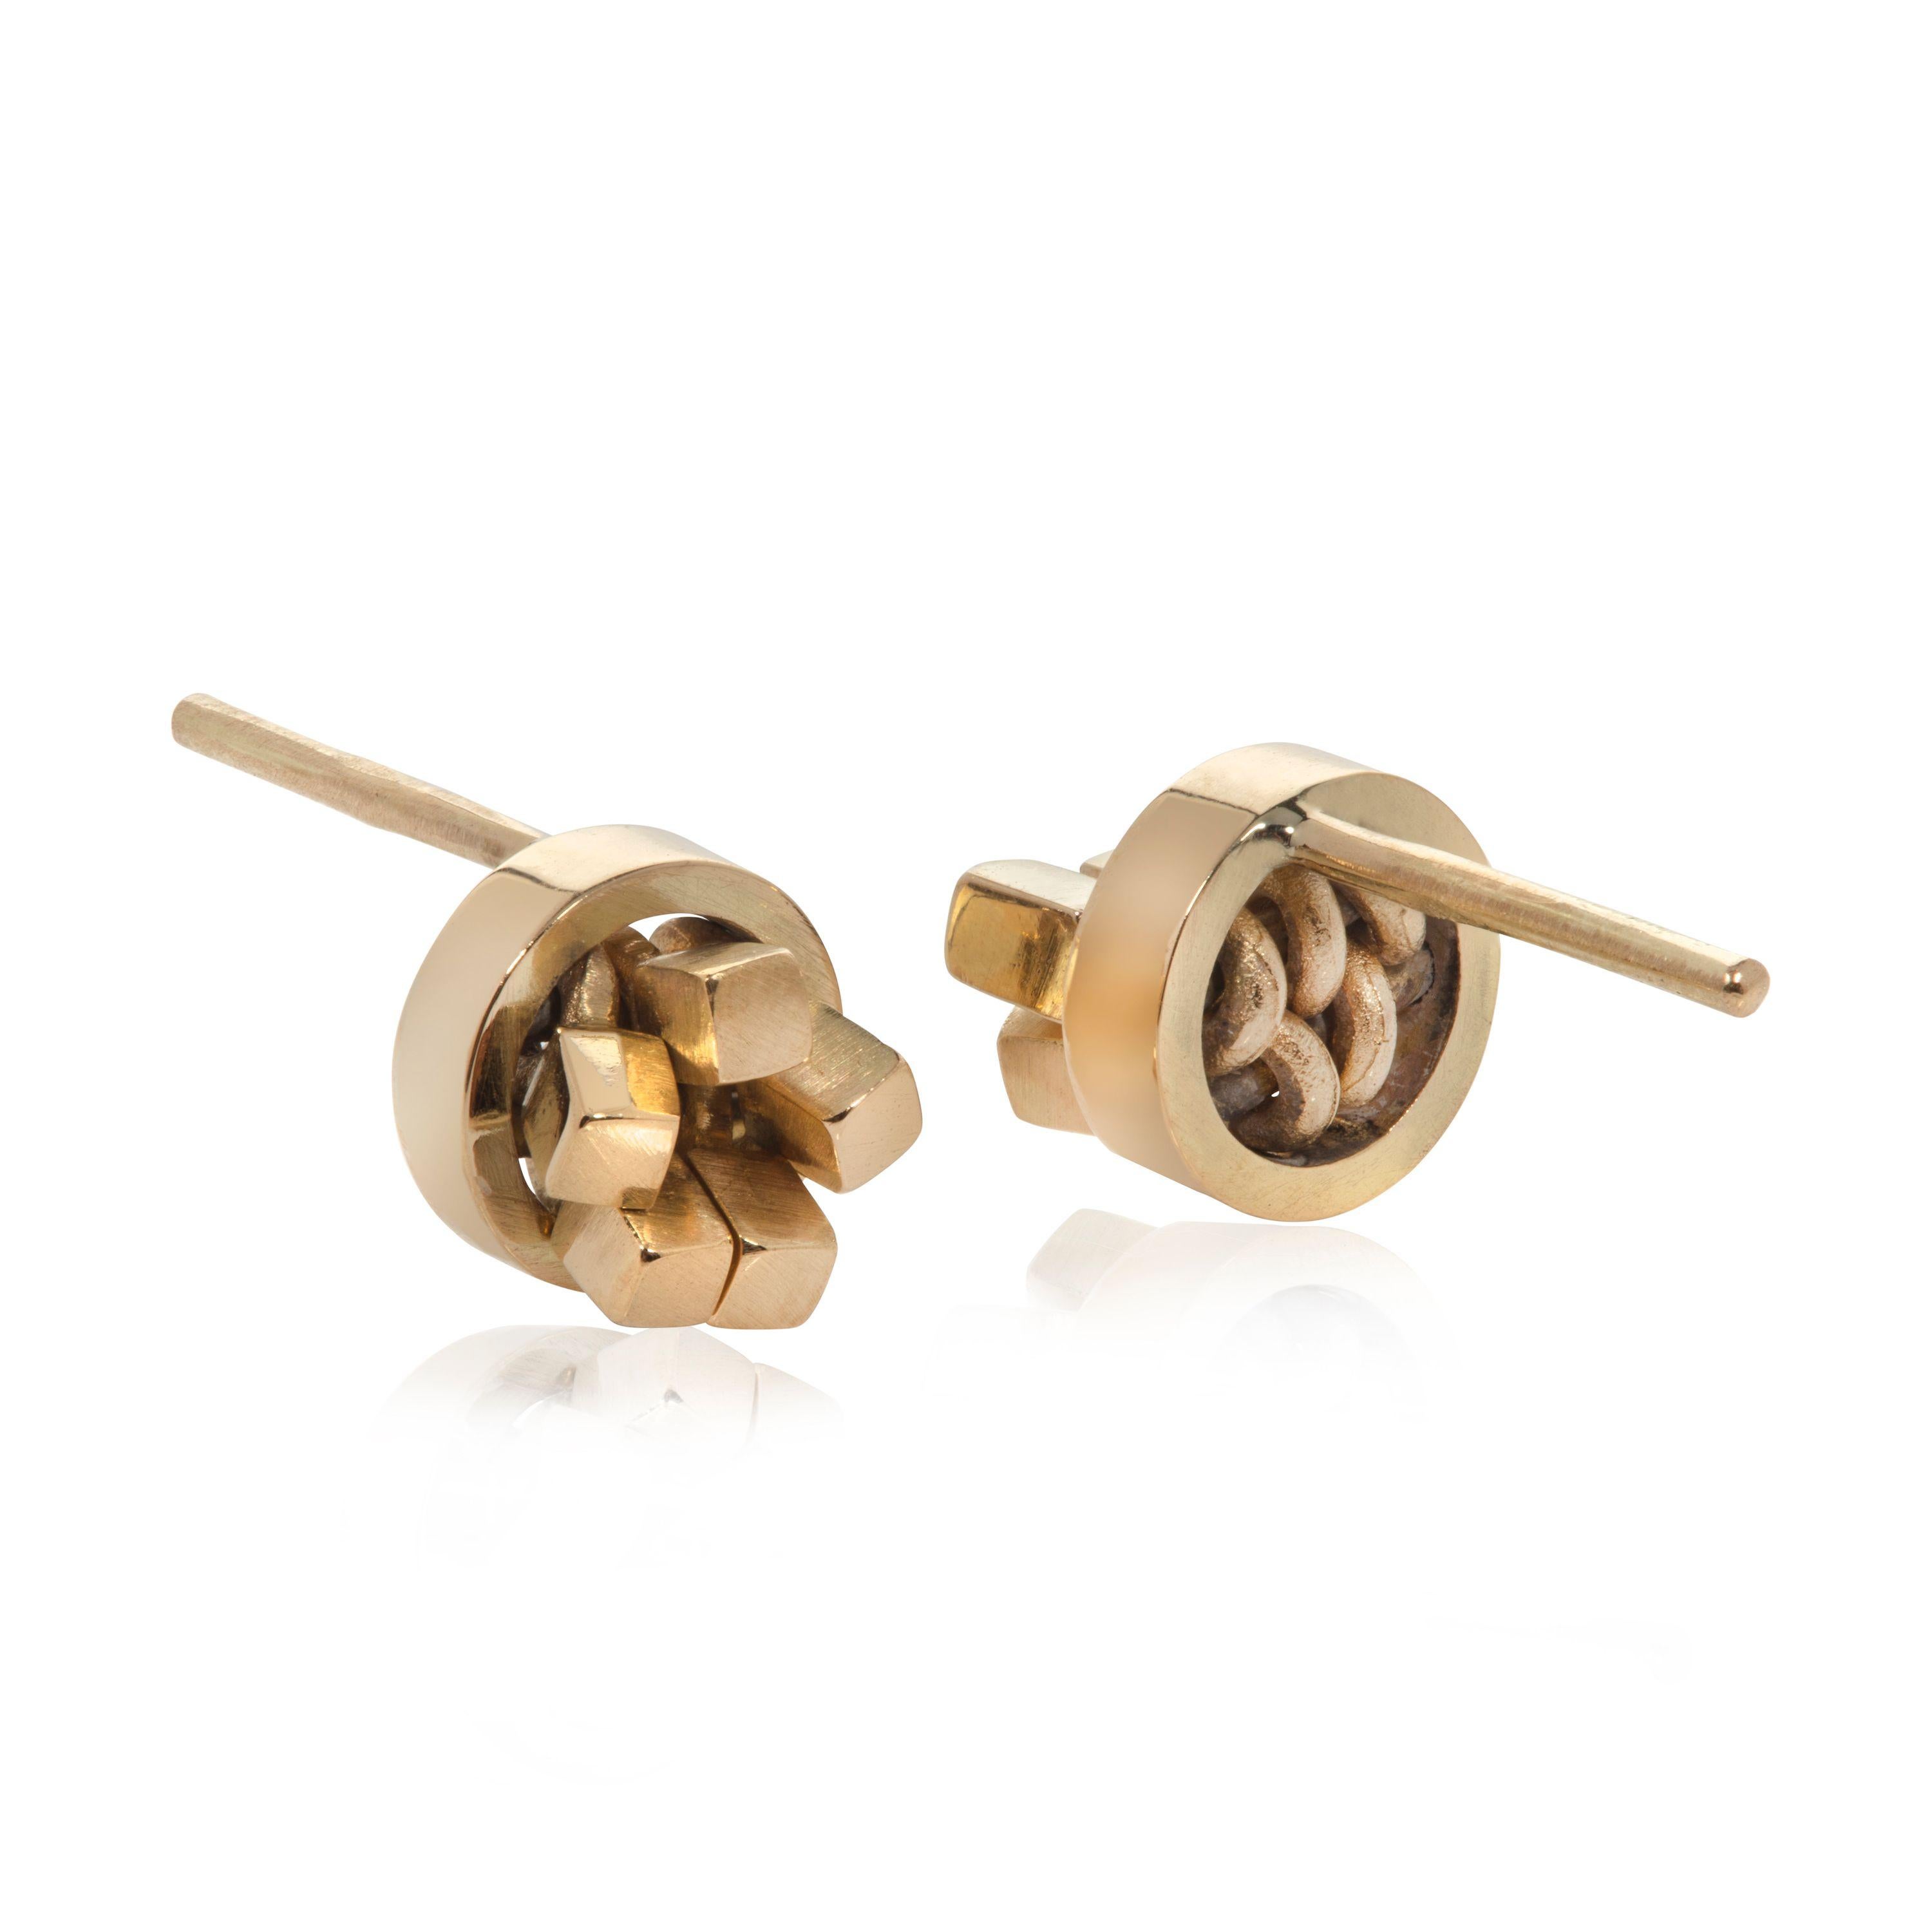 These elegant, striking earrings in 18K gold are designed and made by UK jeweler Sarah Pulvertaft. Within its simple circle frame each earring is comprised of individual mini cubes. These moveable cubes, each capturing the reflection of light